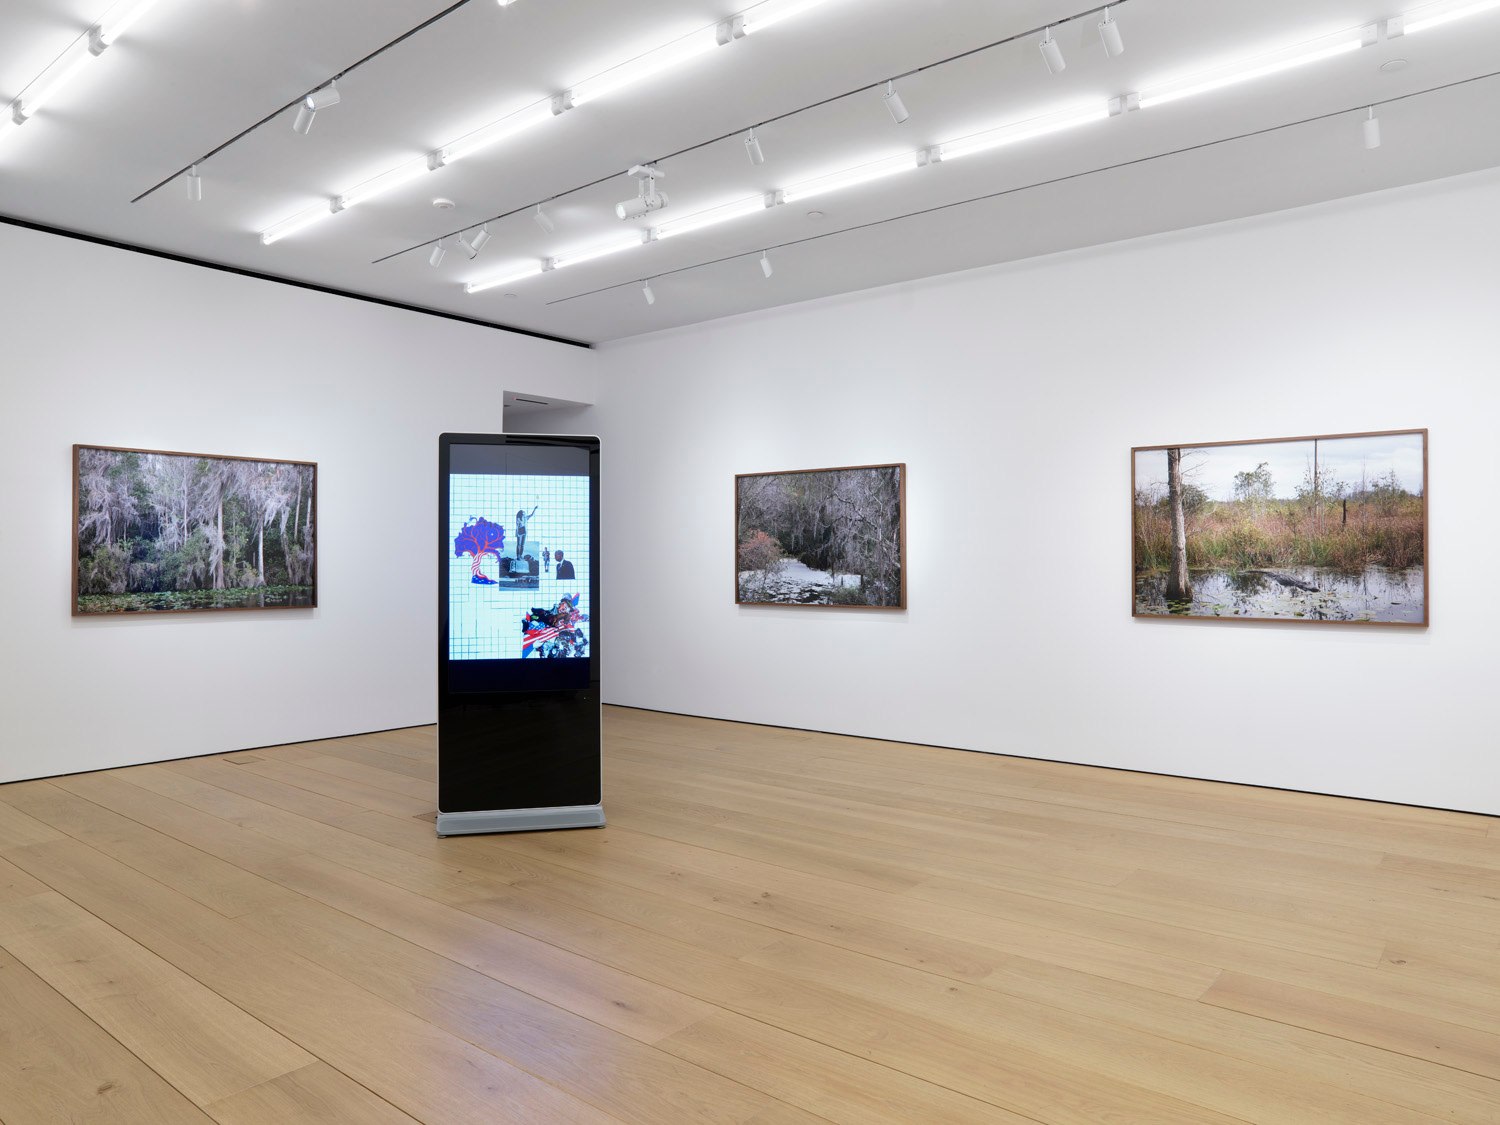 Fifth installation view of the exhibition Catherine Opie: Rhetorical Landscapes at Lehmann Maupin New York